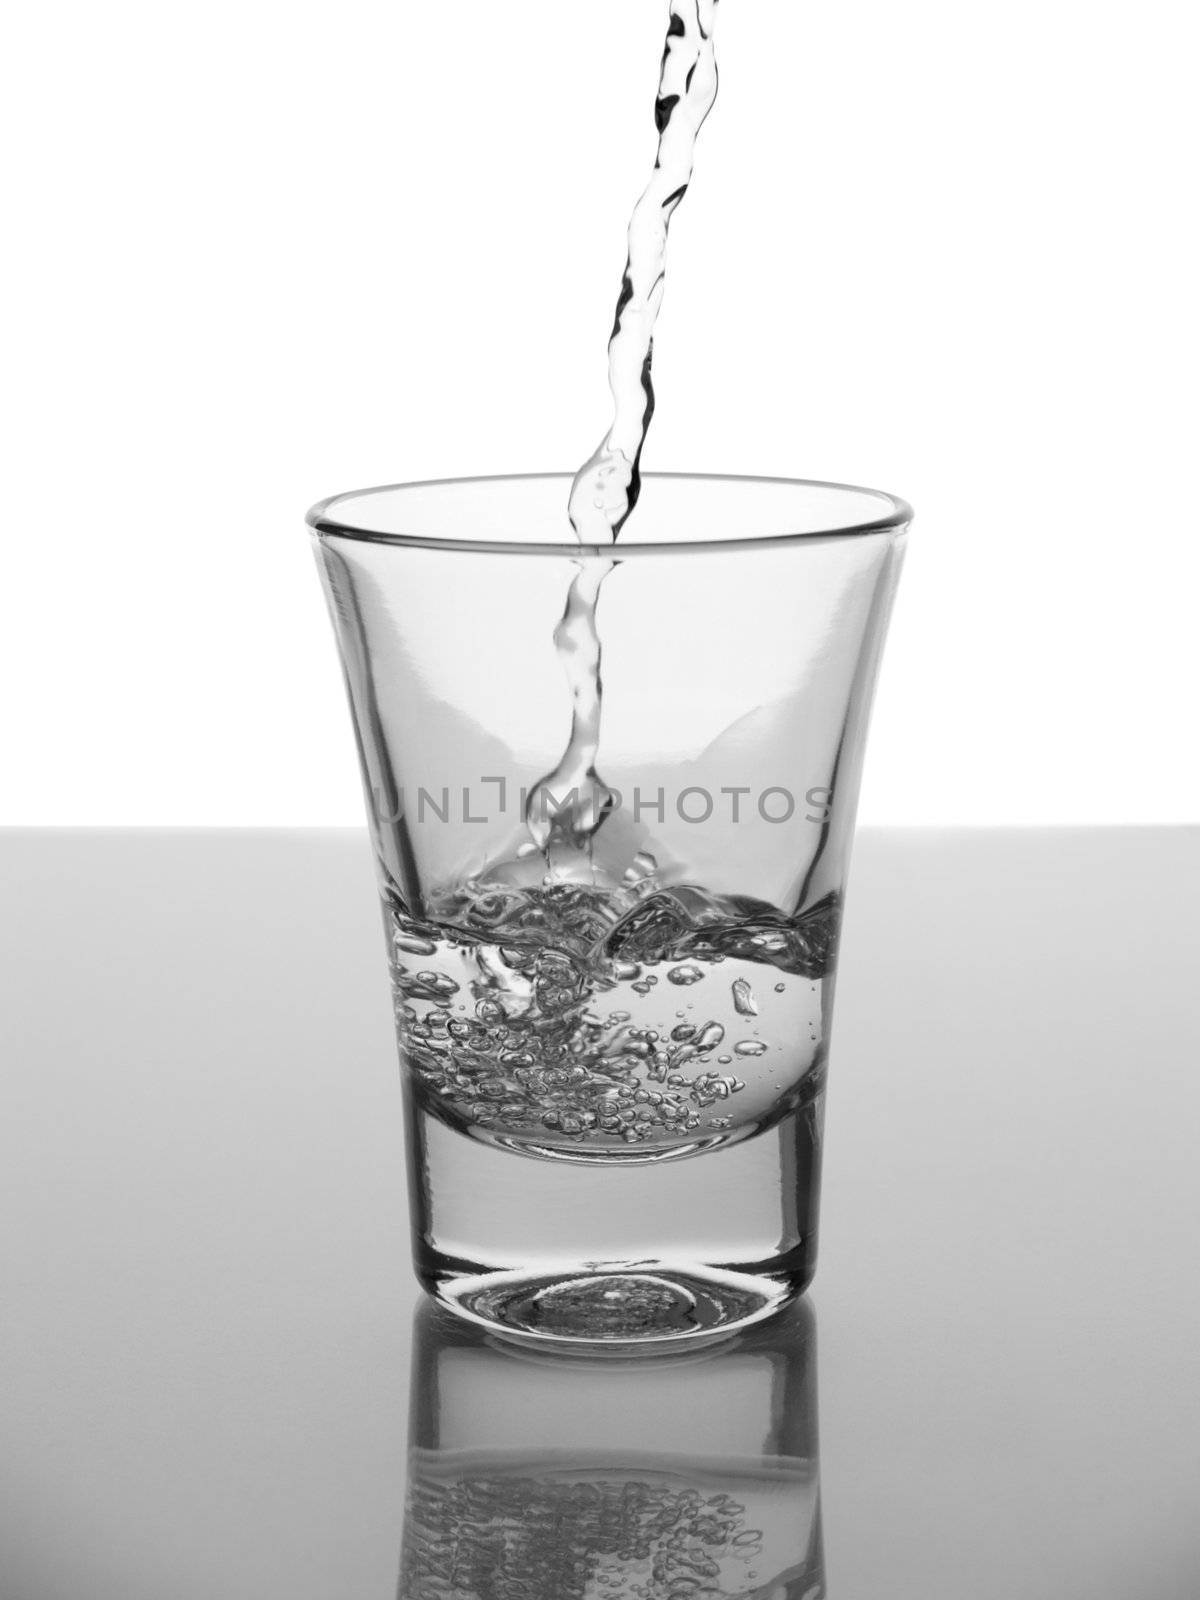 Water being poued into a glass with reflection on white background.